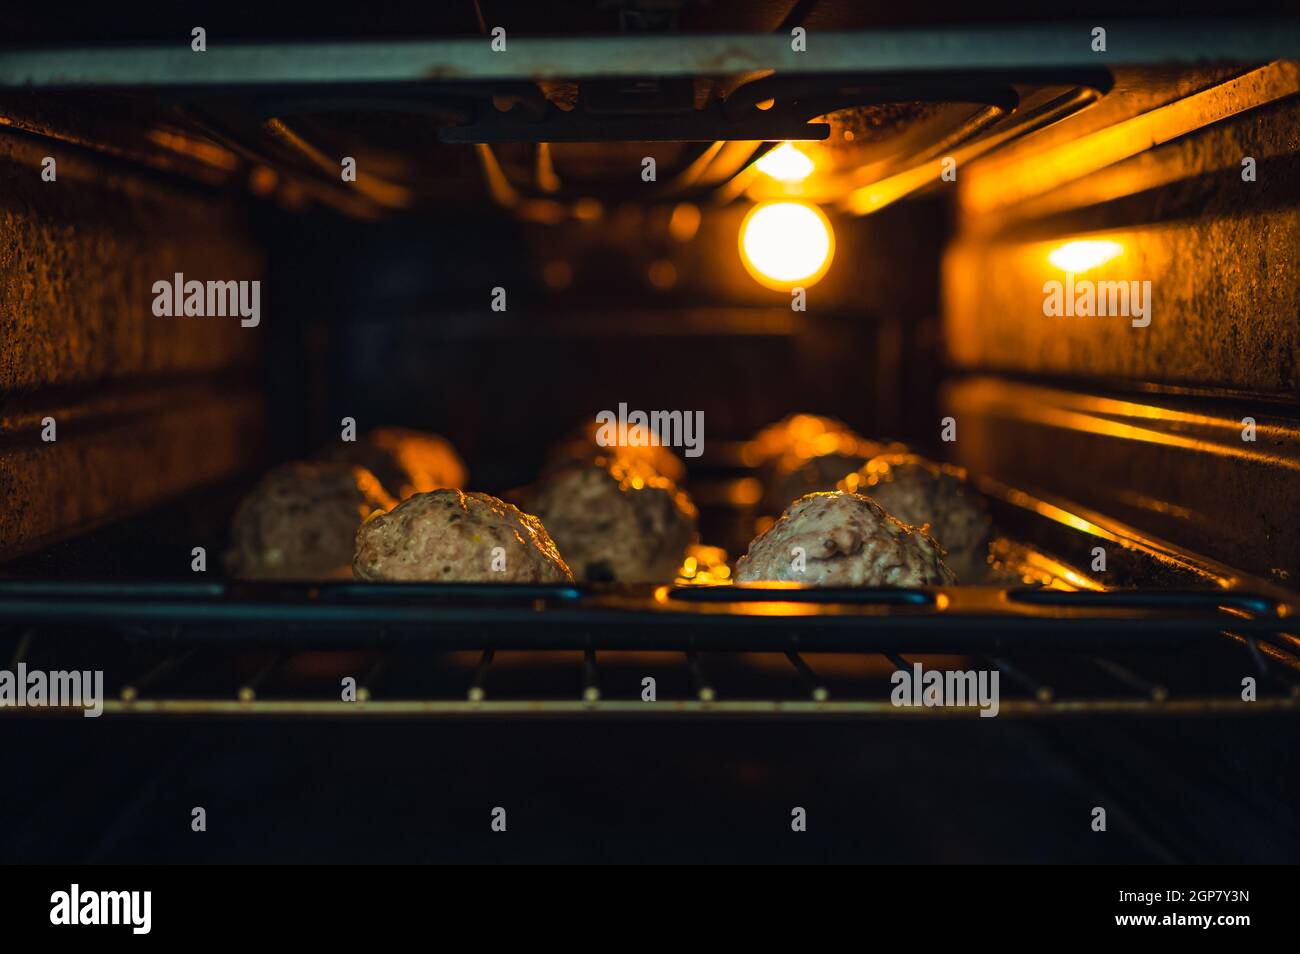 View into the oven on the baking tray for meatballs. Little light, light only from the oven. Shallow depth of field, blurred background. Stock Photo